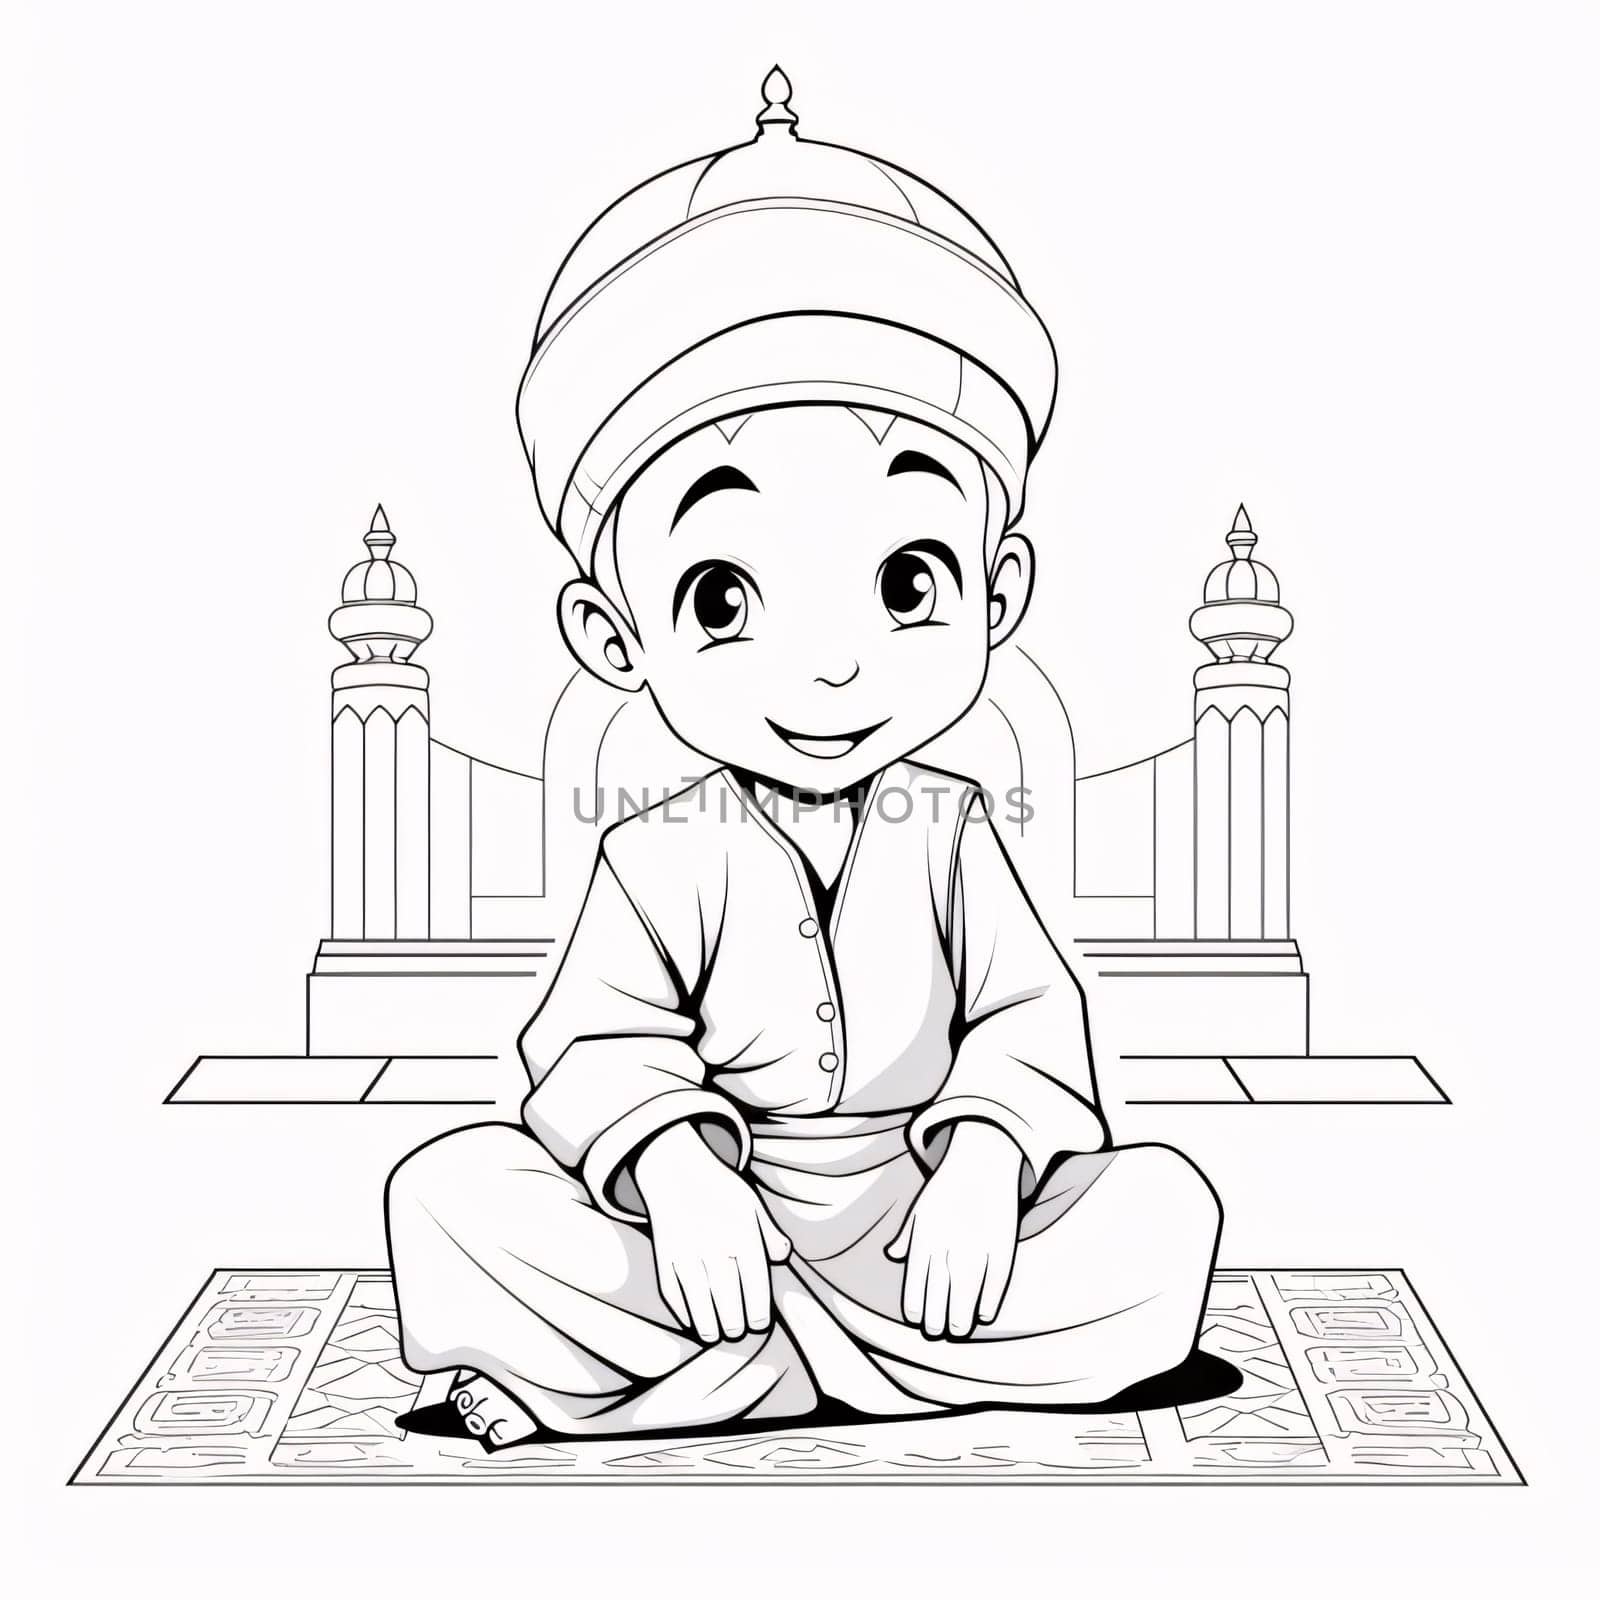 Black and white coloring sheet of a boy in a turban on a rug at prayer. Ramadan as a time of fasting and prayer for Muslims. A time to meet with Allah.